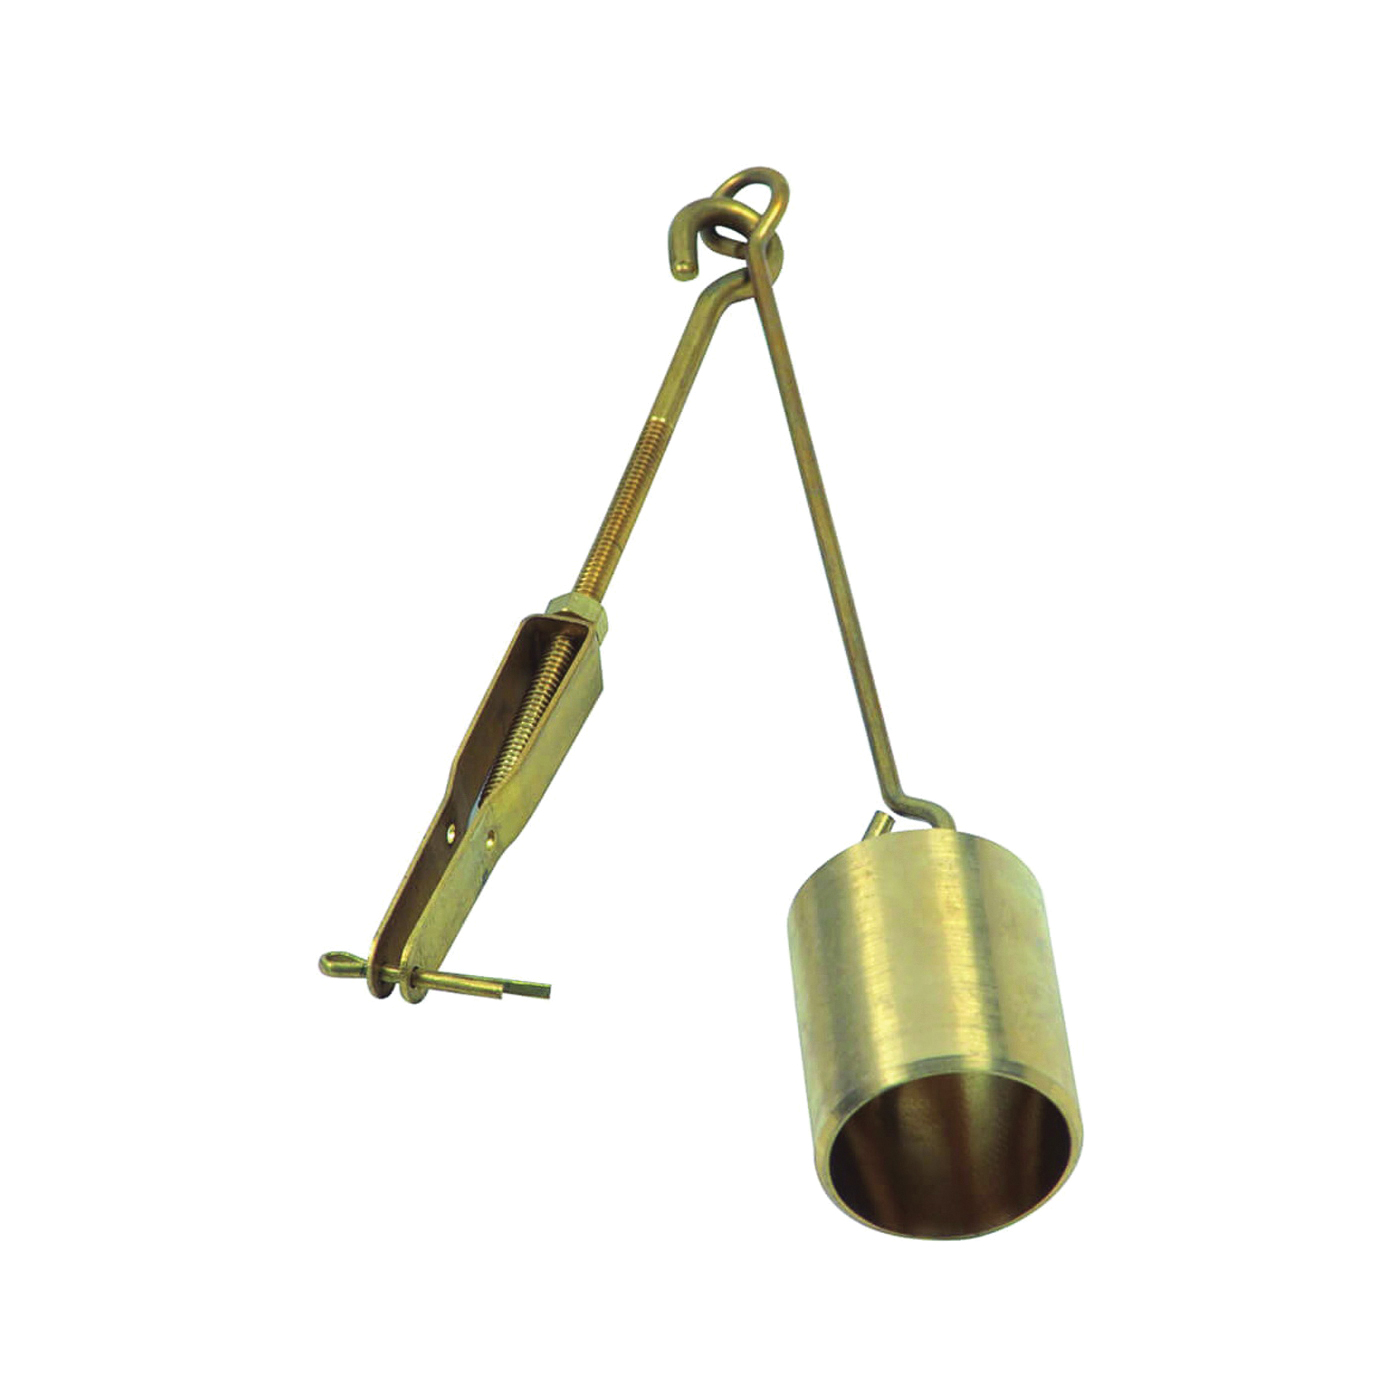 88924 Linkage Assembly, Brass, For: Trip-Lever Drain Assemblies